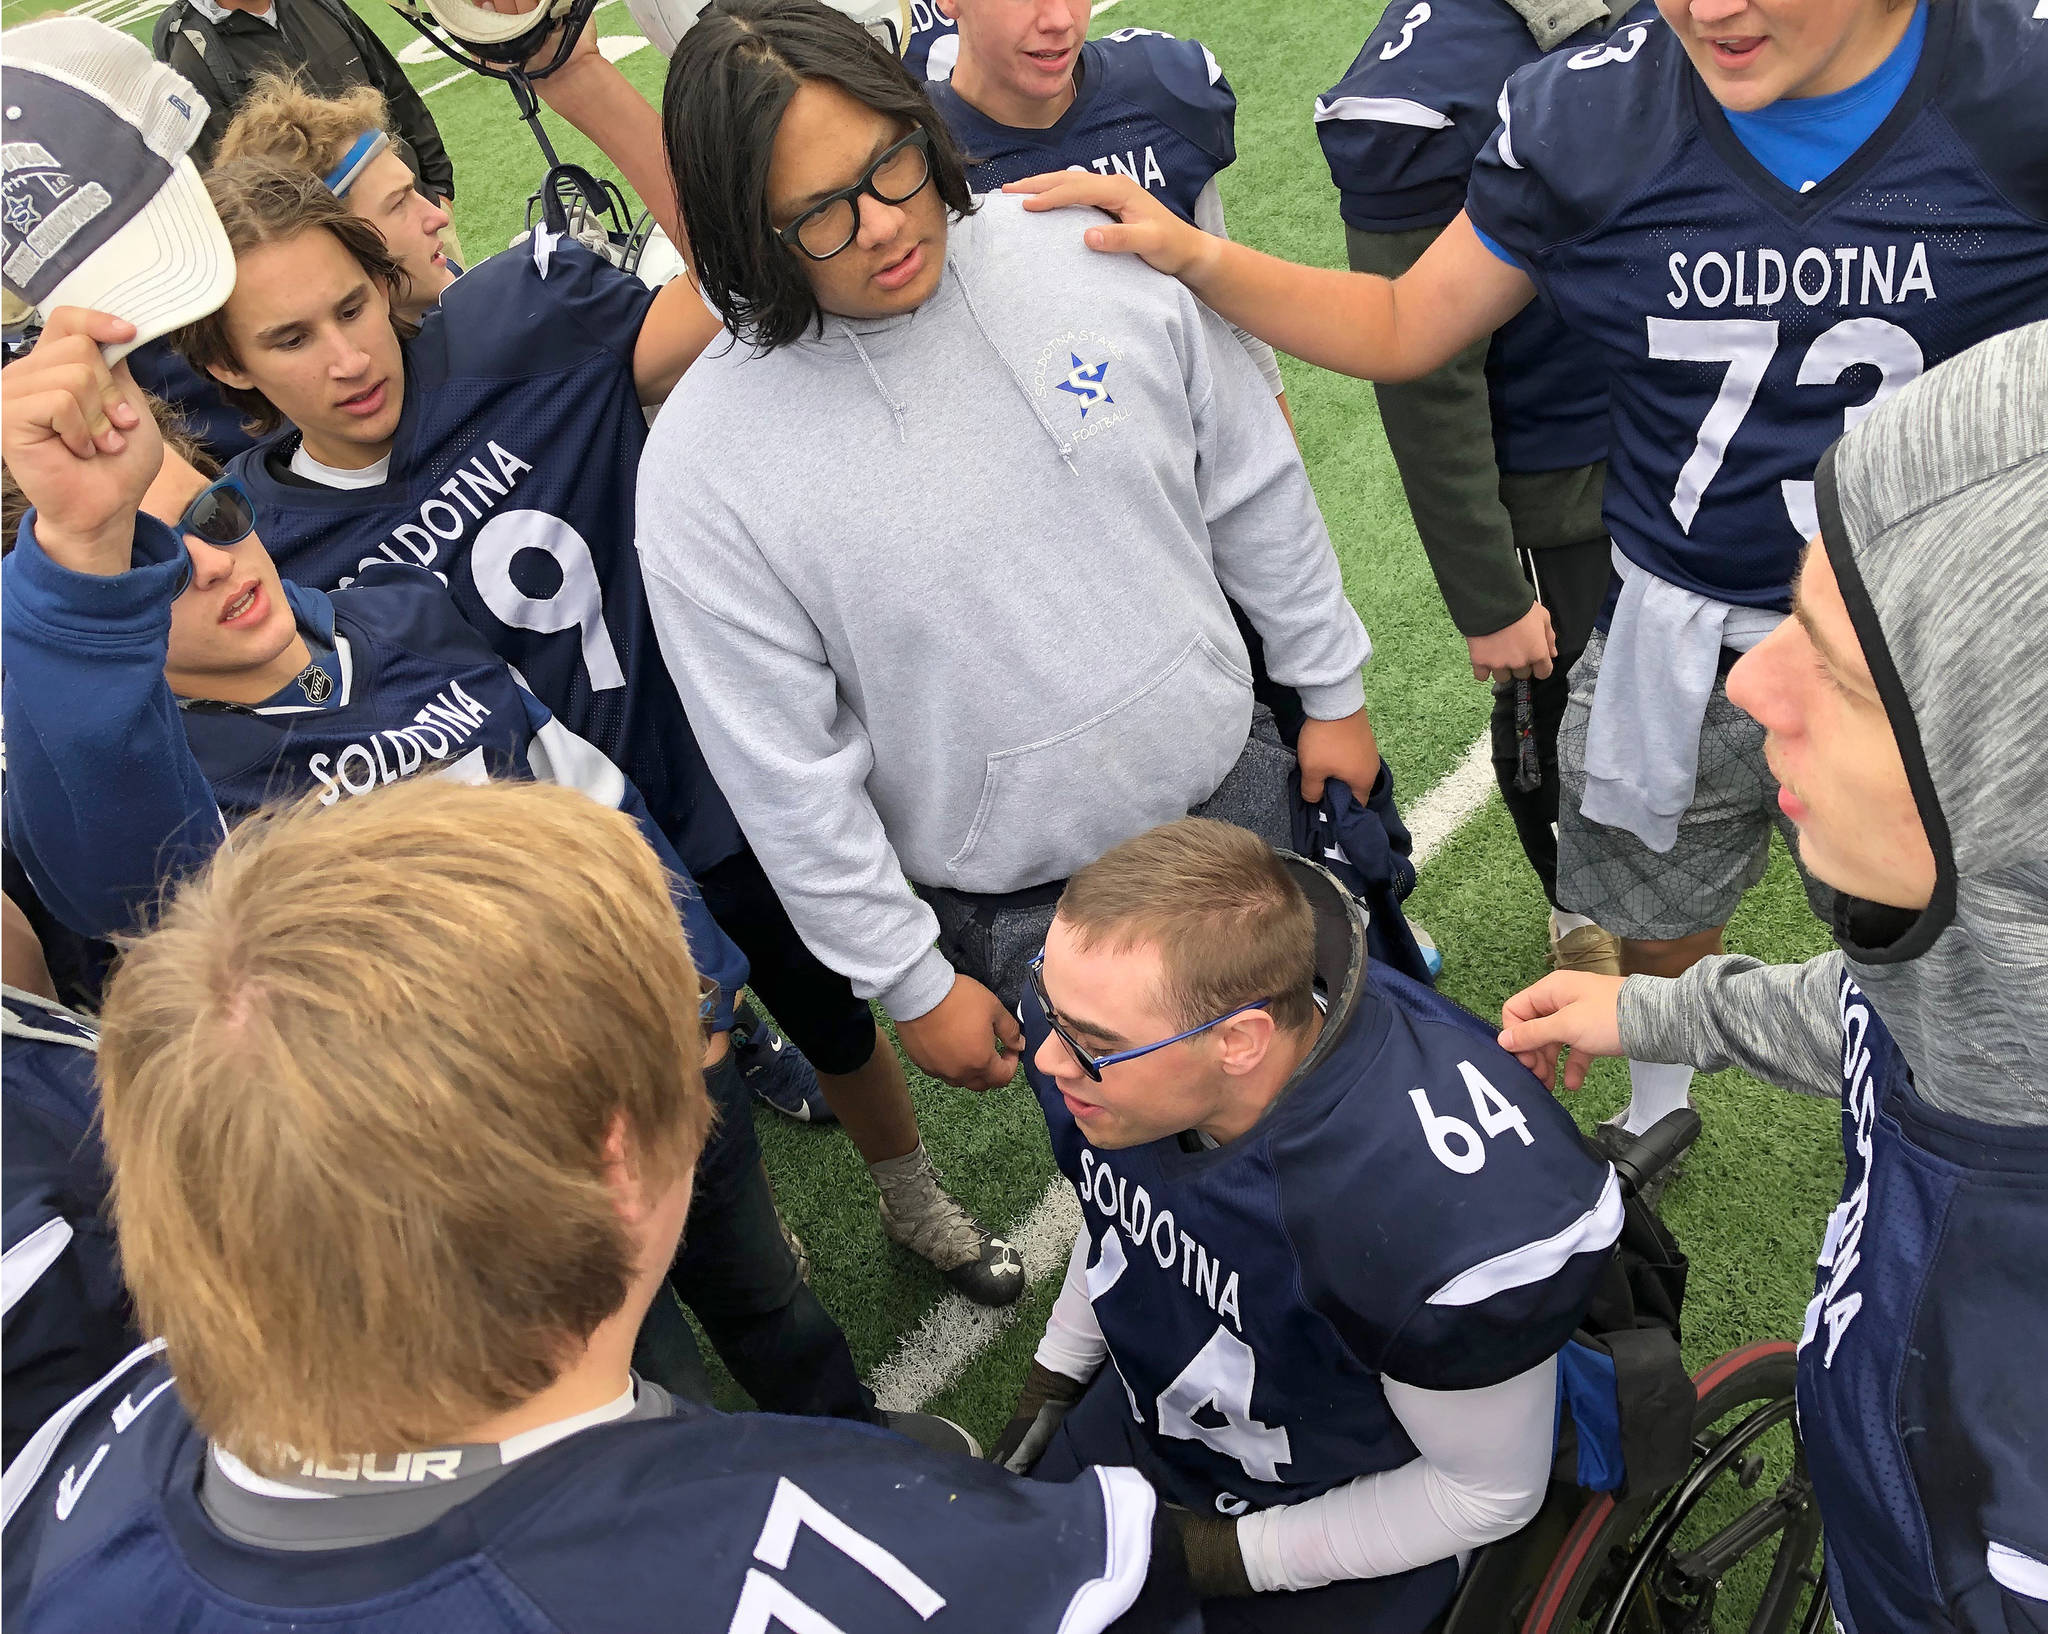 The Soldotna varsity football team crowds around senior manager Matthew Martinelli Saturday after defeating Eagle River 81-7 at Justin Maile Field in Soldotna. (Photo by Joey Klecka/Peninsula Clarion)